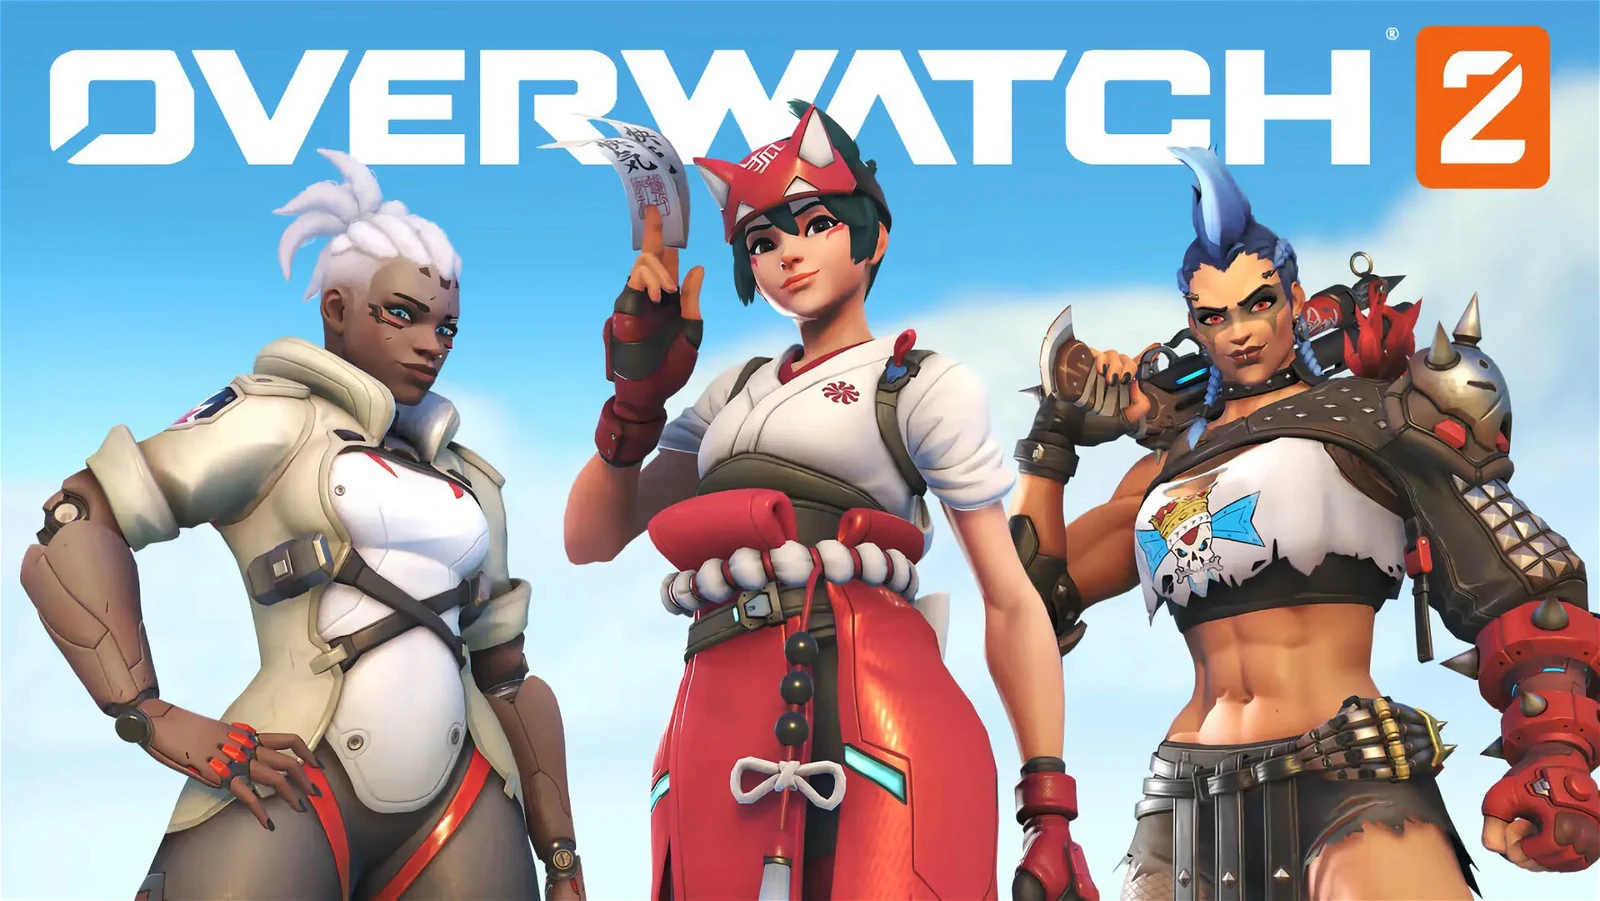 One of the main promotionals for Overwatch 2